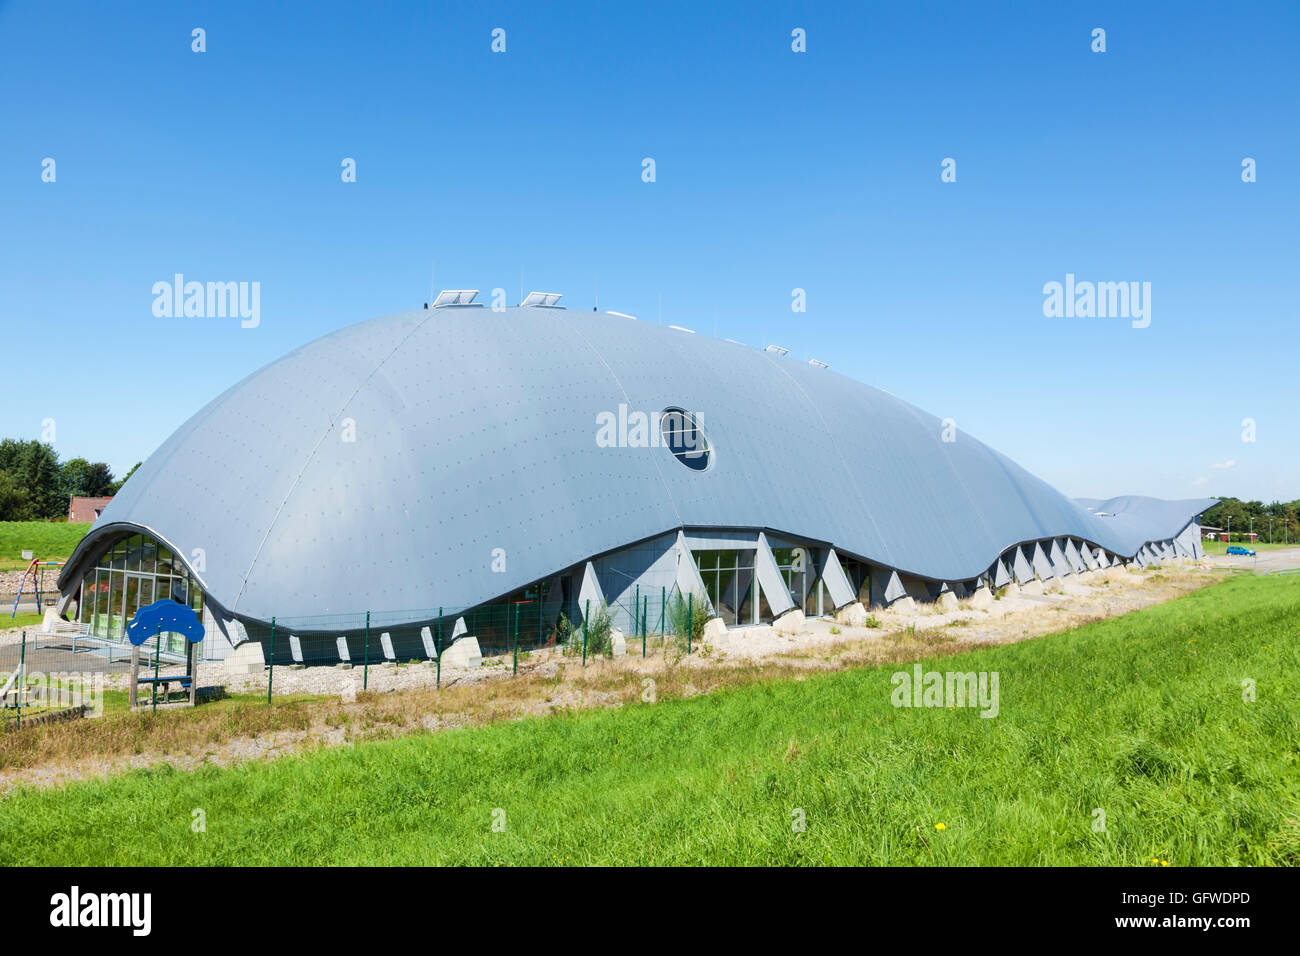 Whale-shaped indoor playground building at Friedrichskoog, Germany Stock Photo